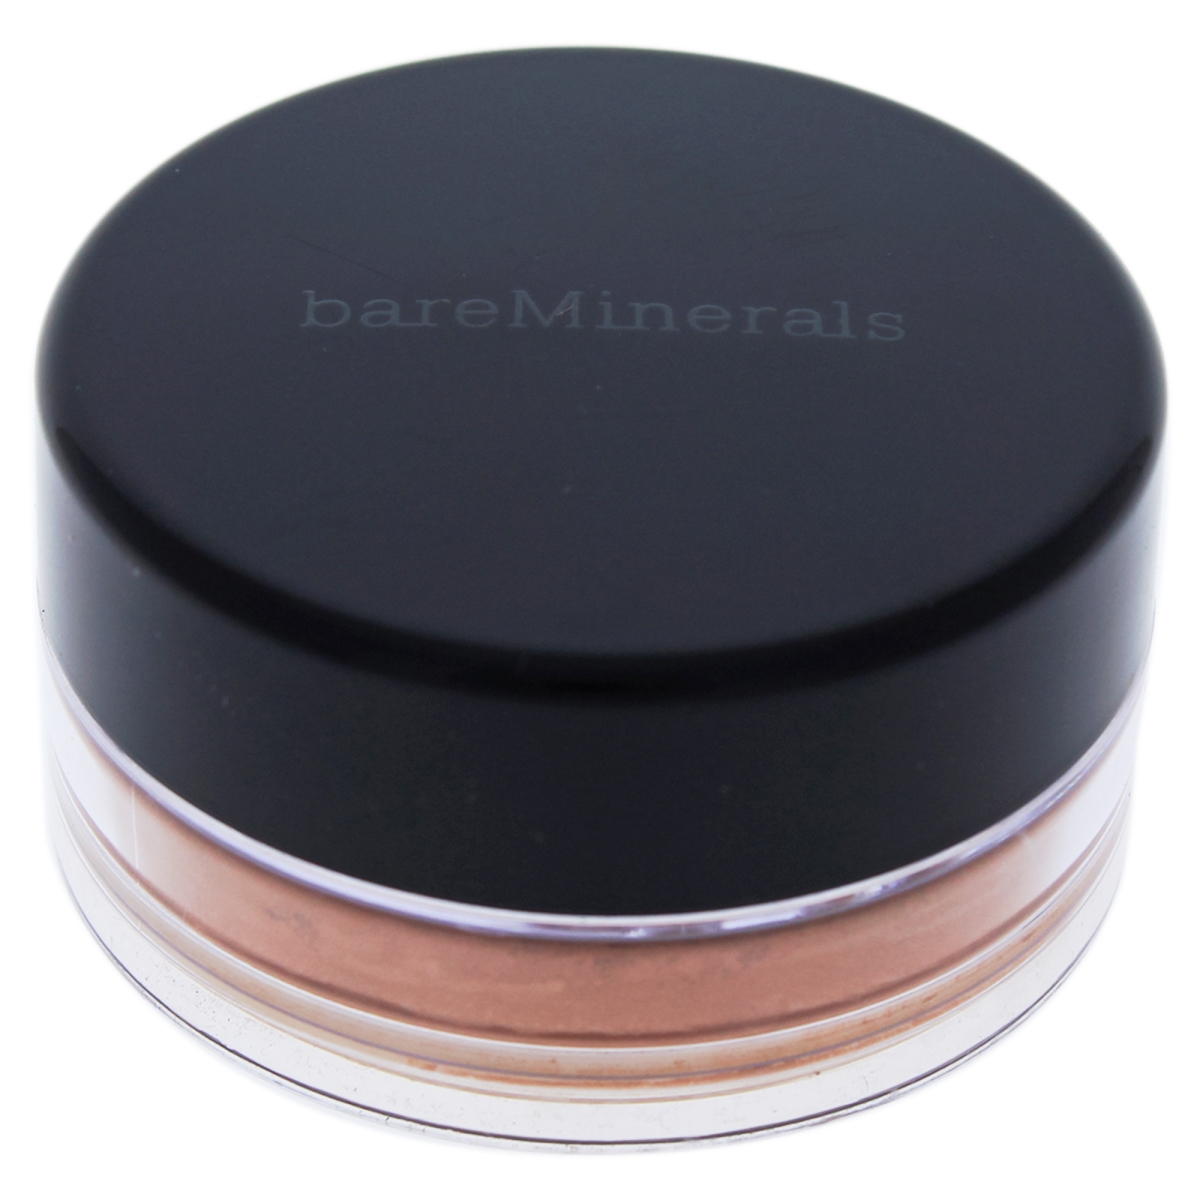 I0085633 0.03 Oz All-over Face Color Powder For Womens - Gilded Radiance